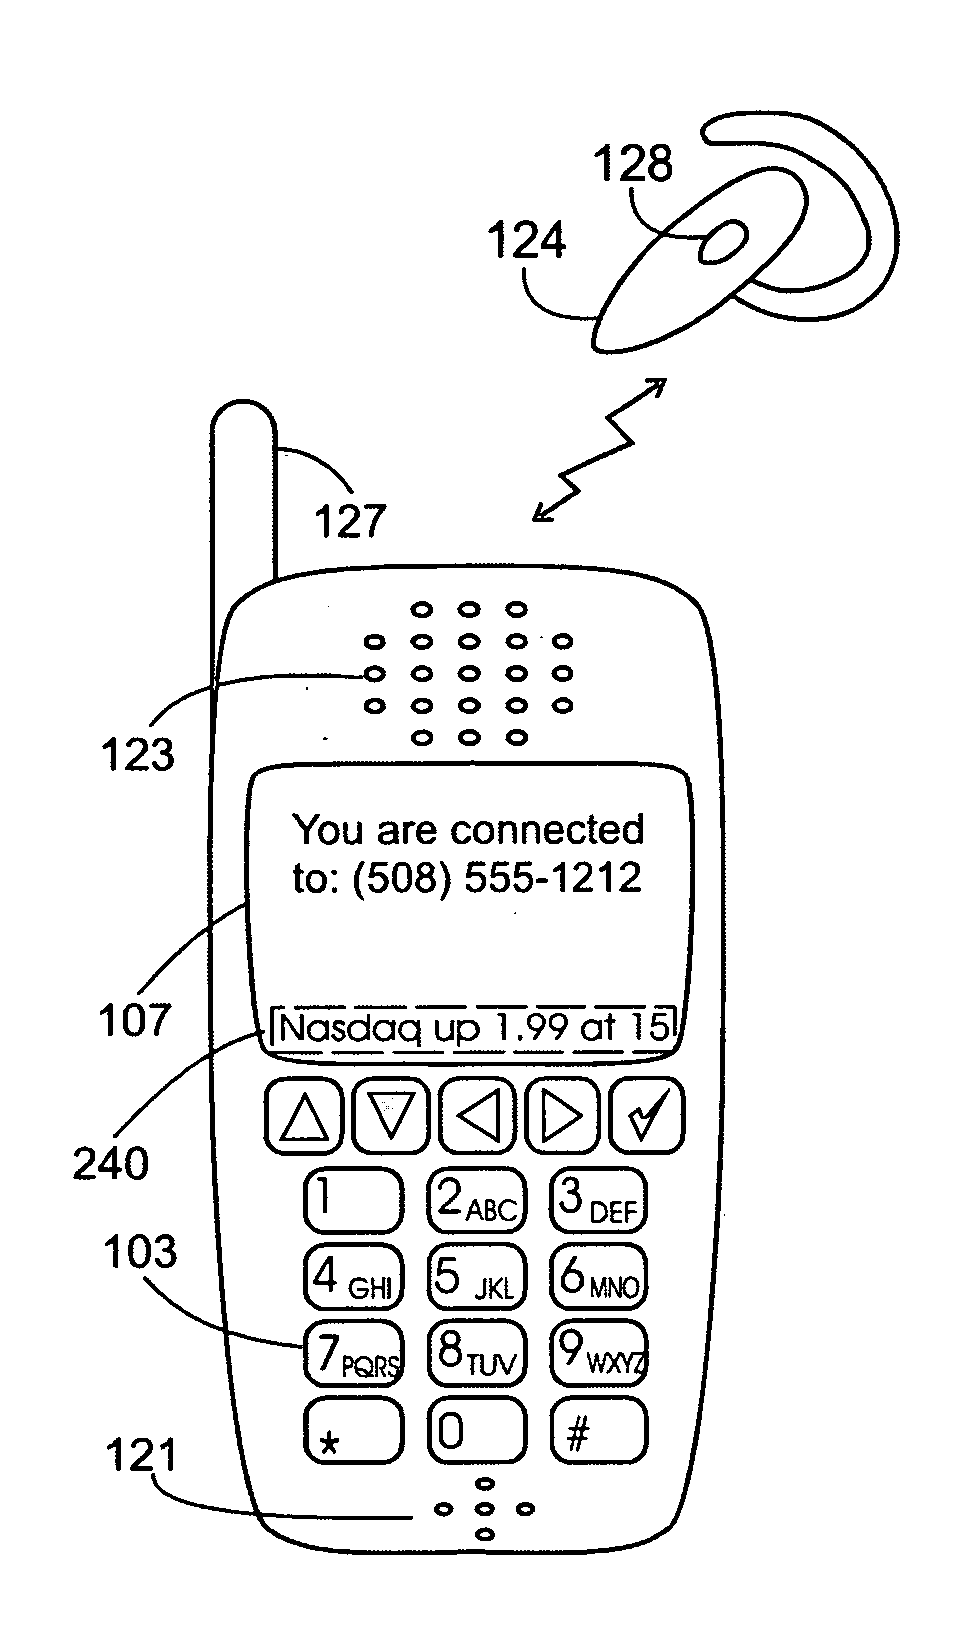 Methods and apparatus for delivering ancillary information to the user of a portable audio device